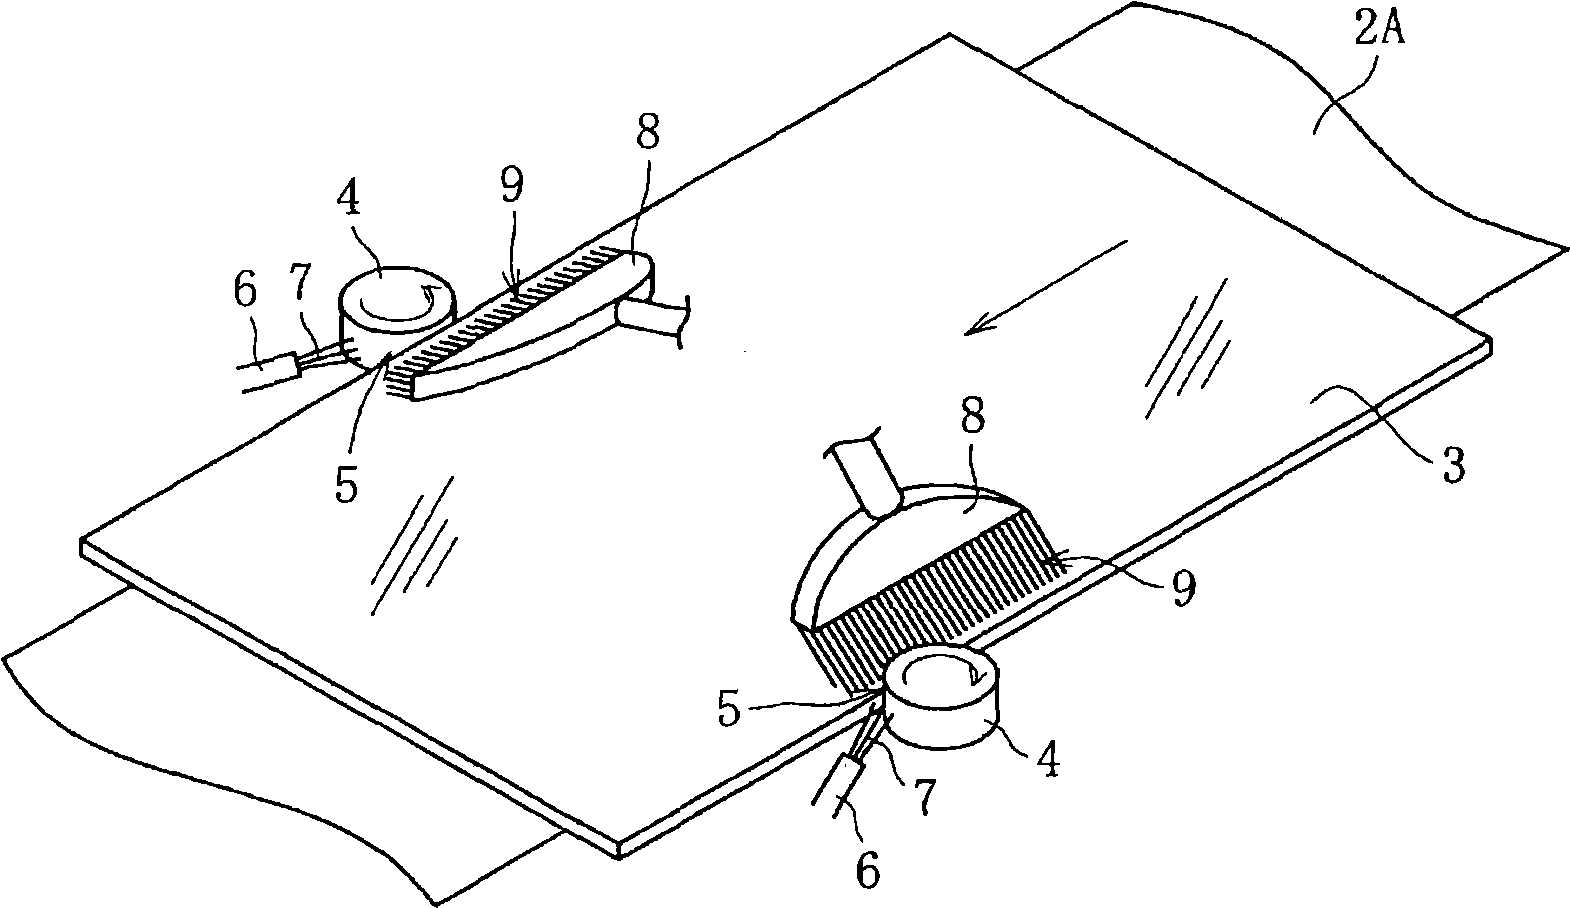 End face grinding apparatus, and method of grinding end face, for glass substrate